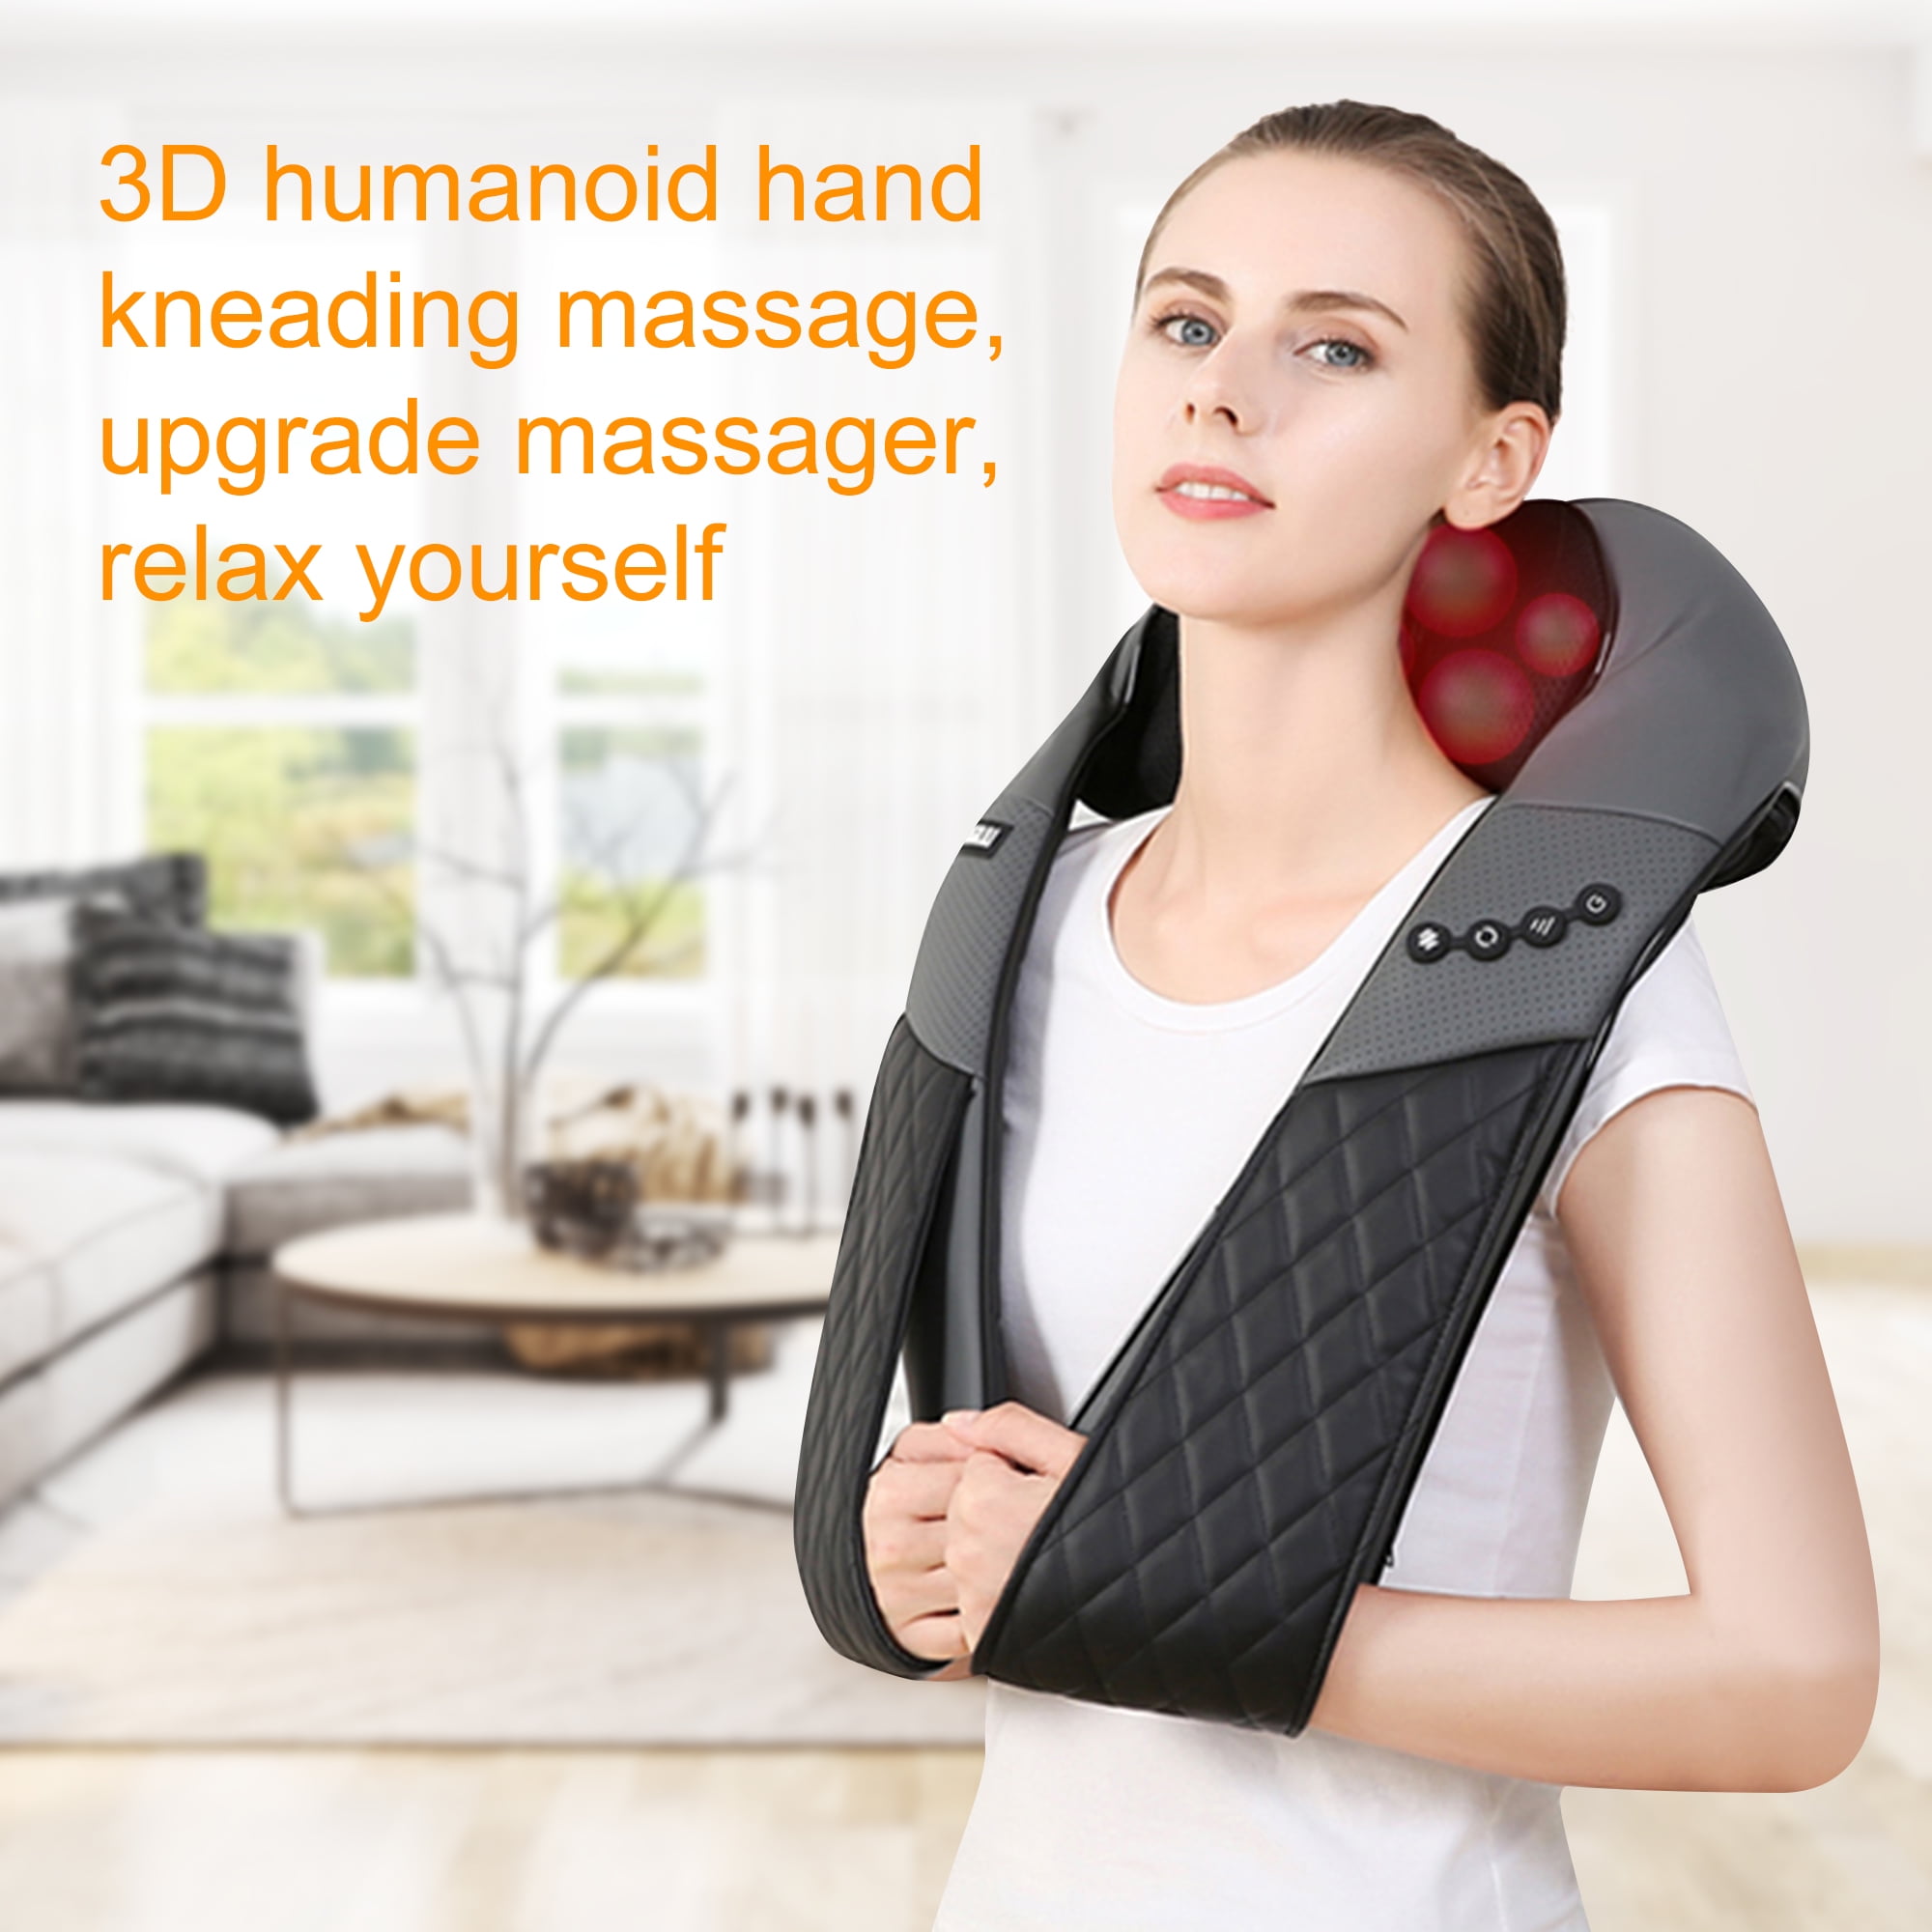 Shiatsu Back Shoulder and Neck Massager with Heat - Electric Full Body  Massager - Massagers for Neck and Back - Perfect Gifts for Friends, Family,  Lover (Grey)..$79.99 For  USA 🇺🇸 Testers